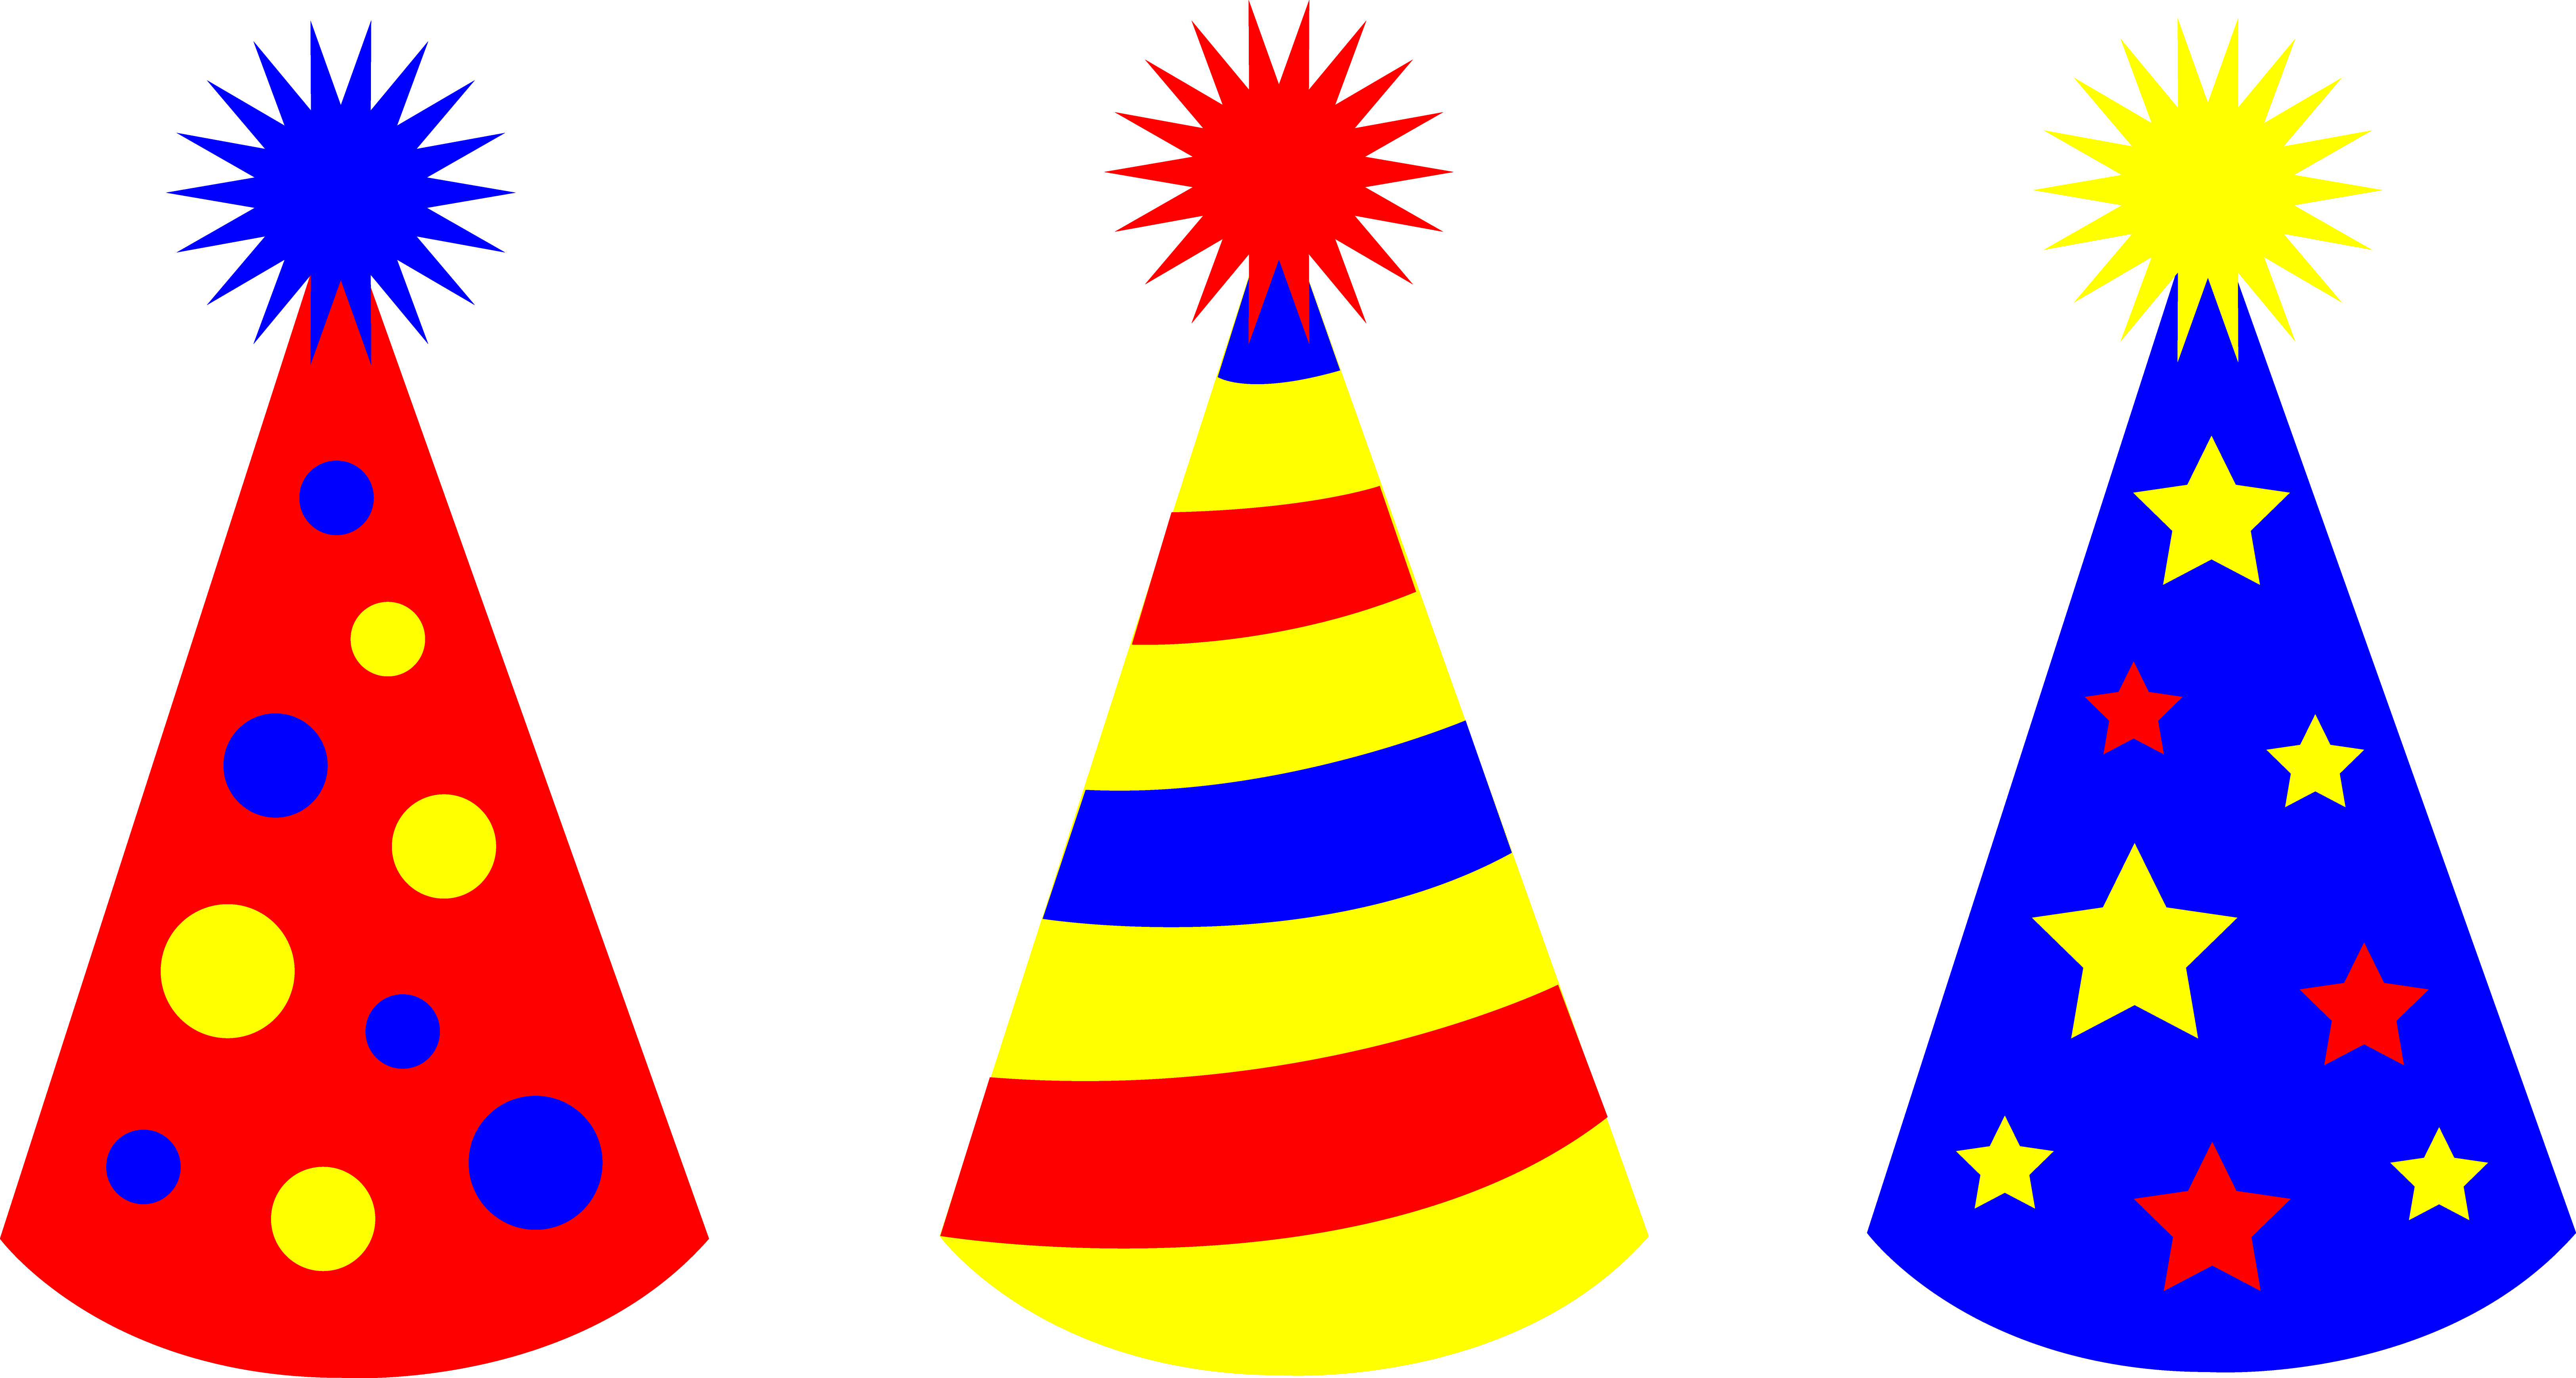 free clipart images birthday party - photo #23